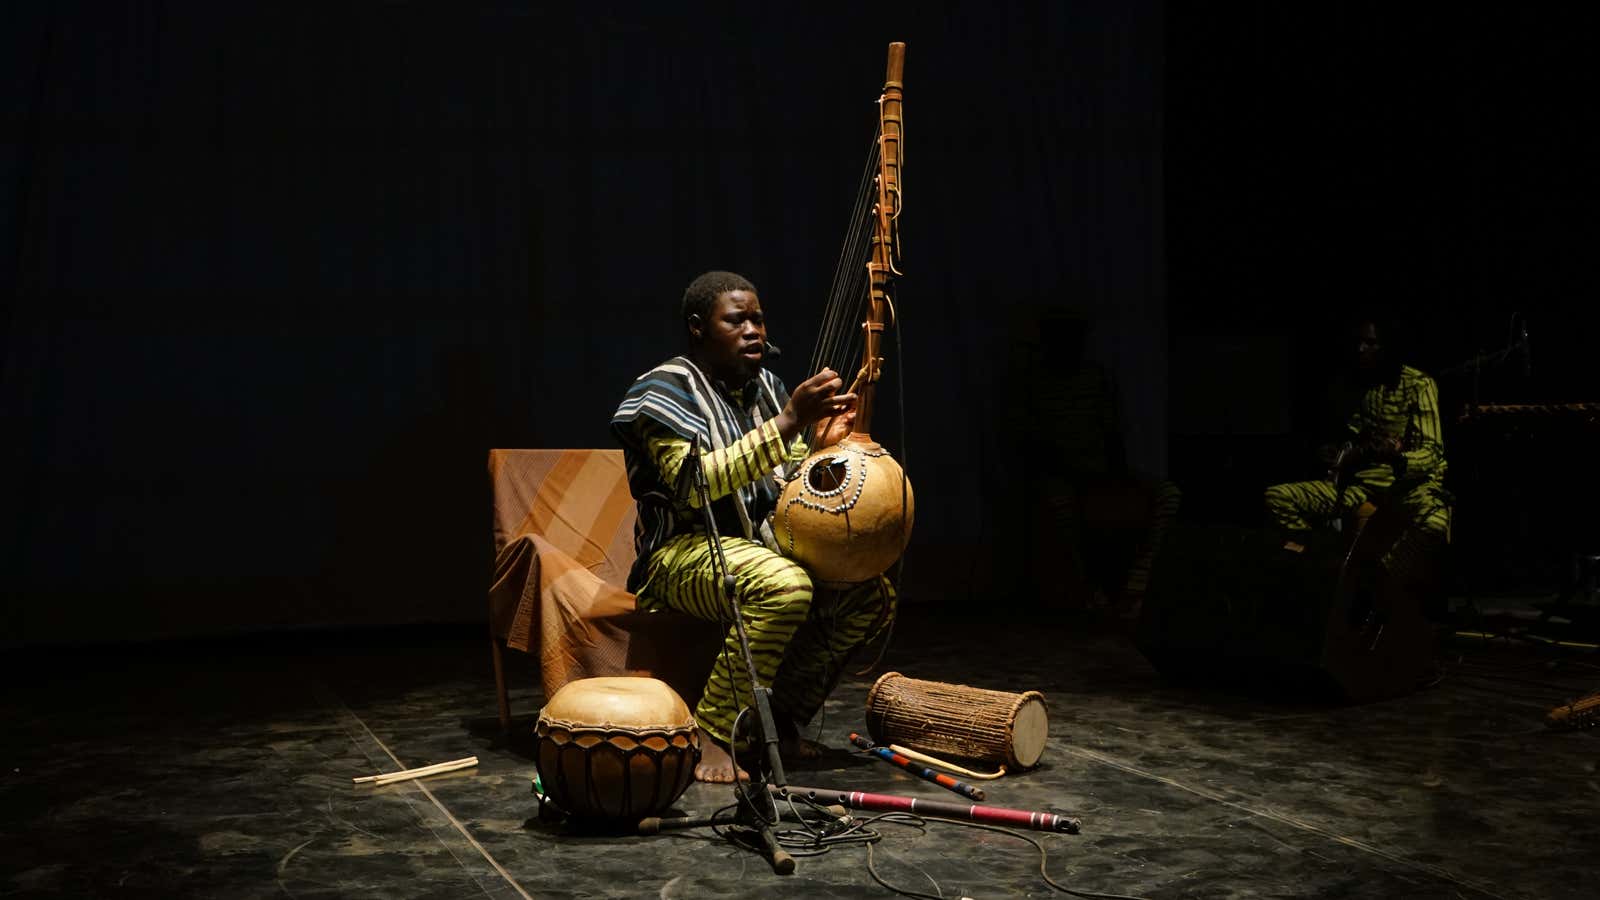 Burkina Faso’s celebrated architect, Francis Kéré, the first African to win the Pritzker Prize and Japanese composer Keiko Fujiie, set out to collaborate with local artists to write Burkina Faso’s first opera.